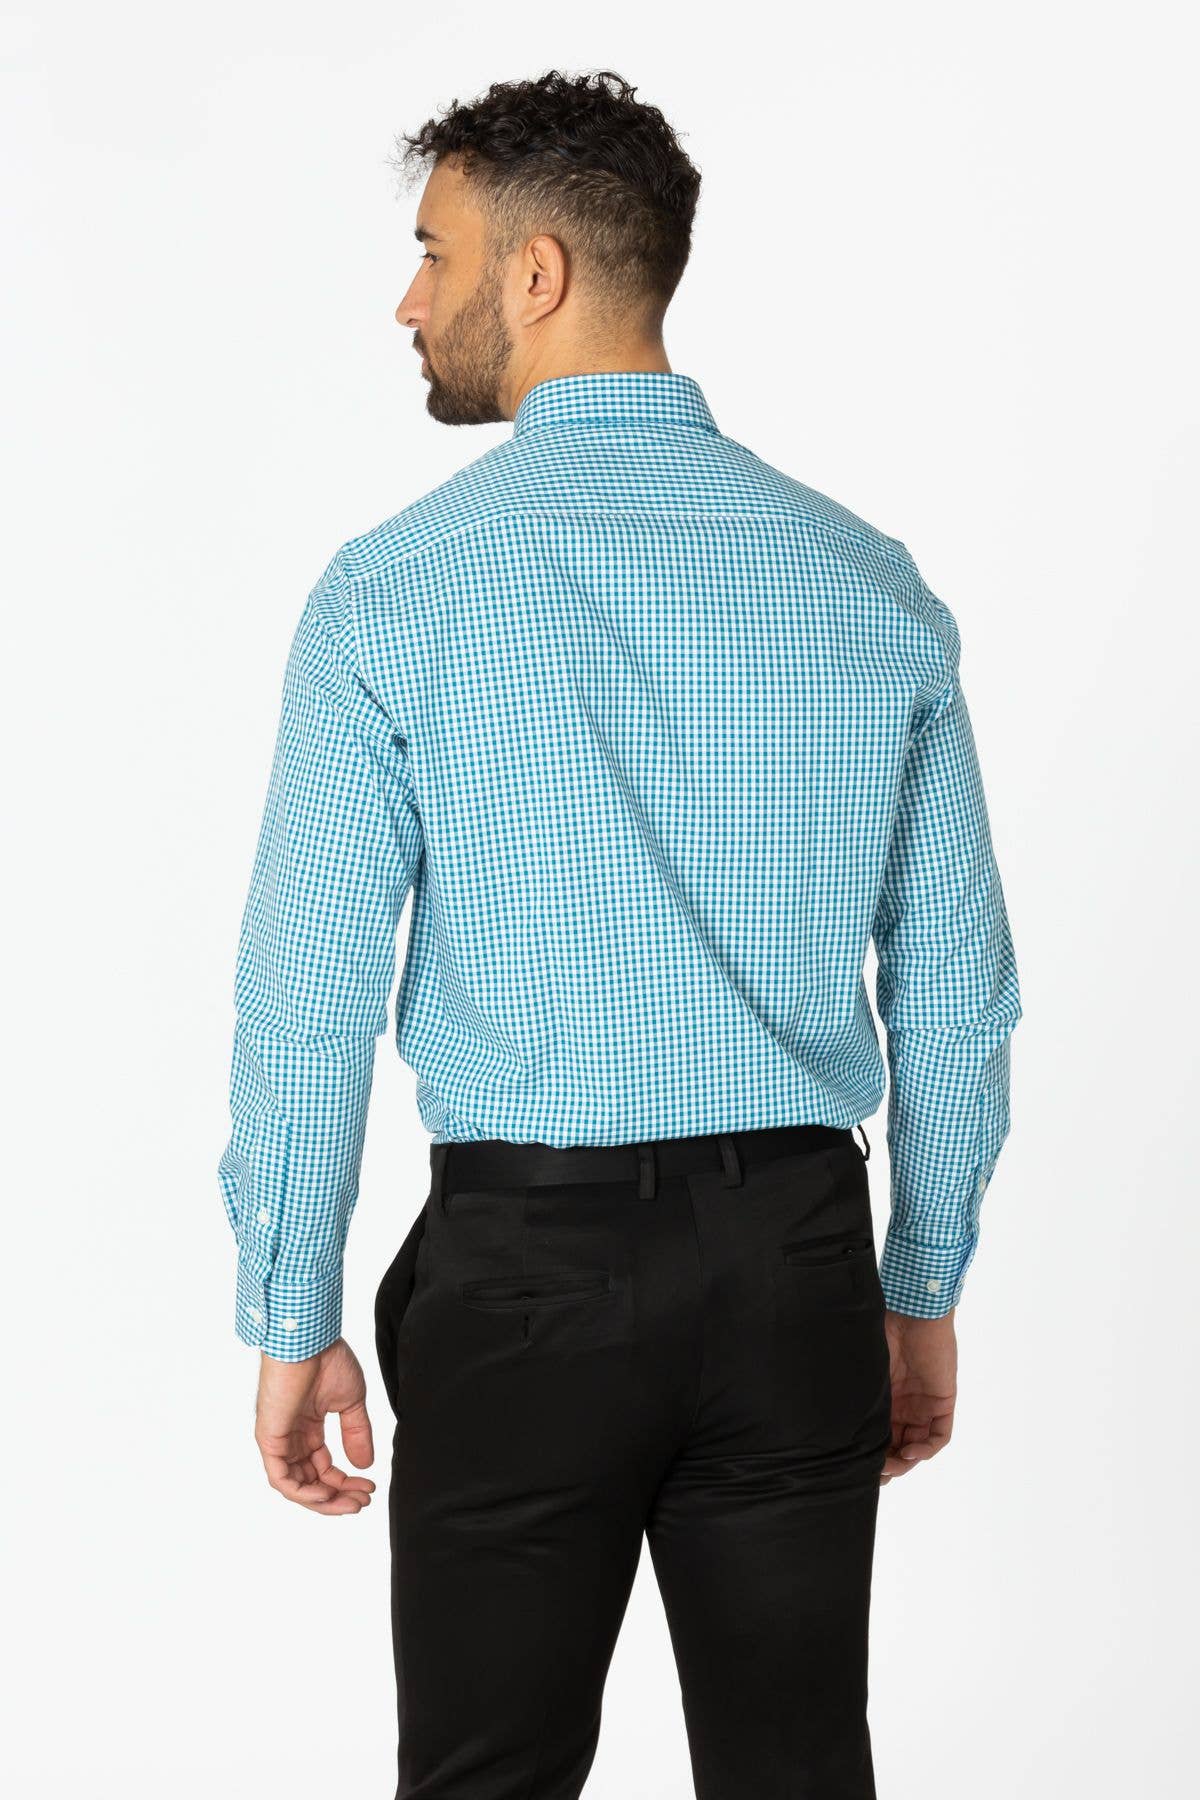 Check Teal Button Down